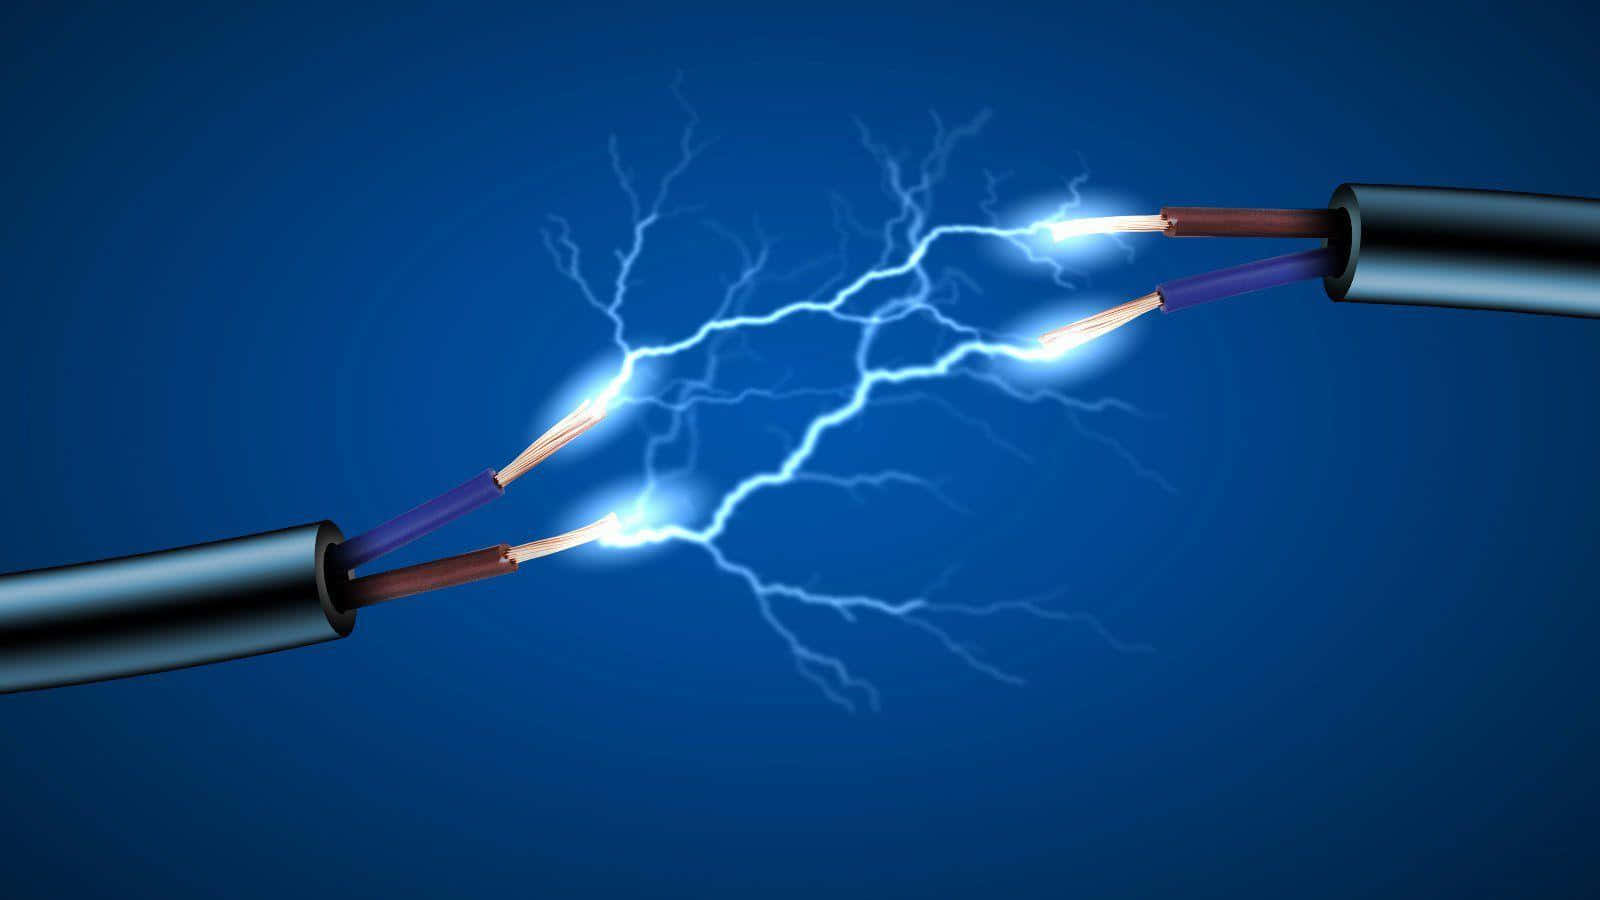 Two Electrical Wires Connected With Lightning